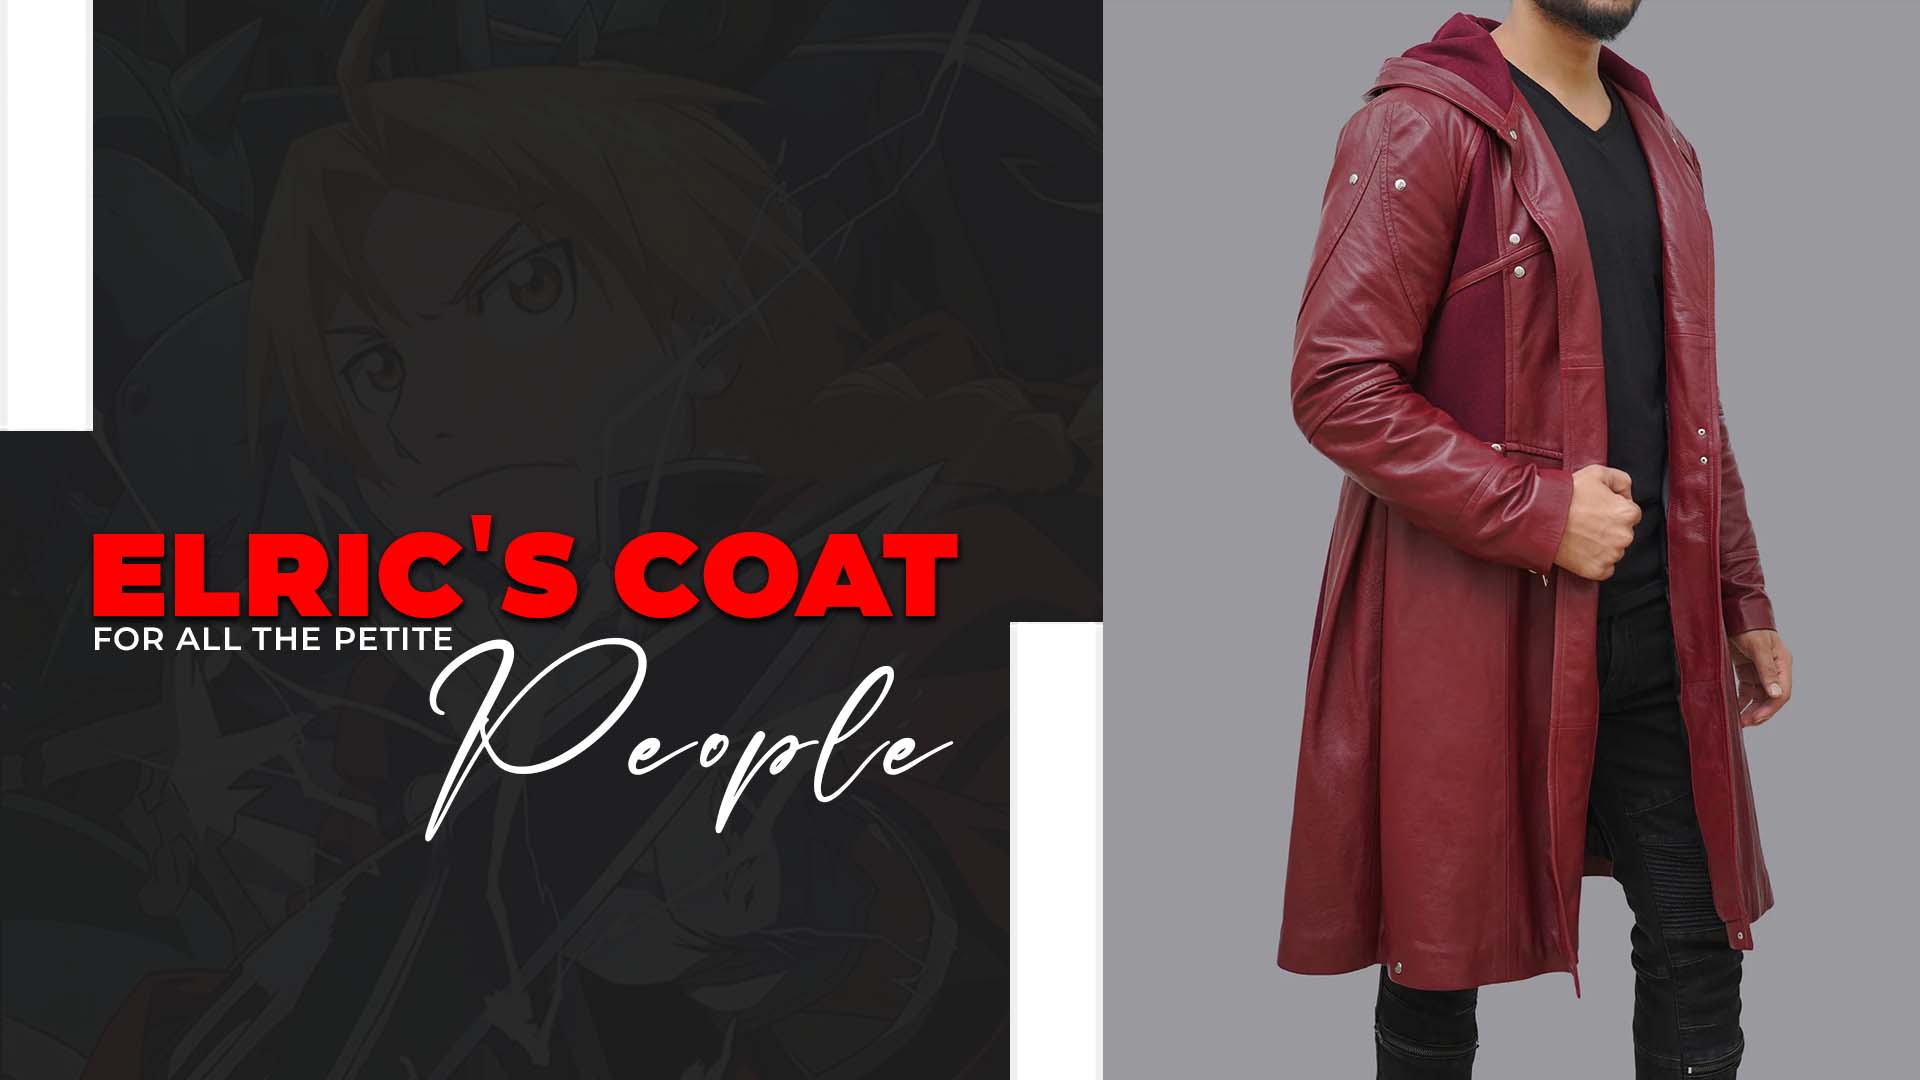 Elric's Coat for all the Petite People